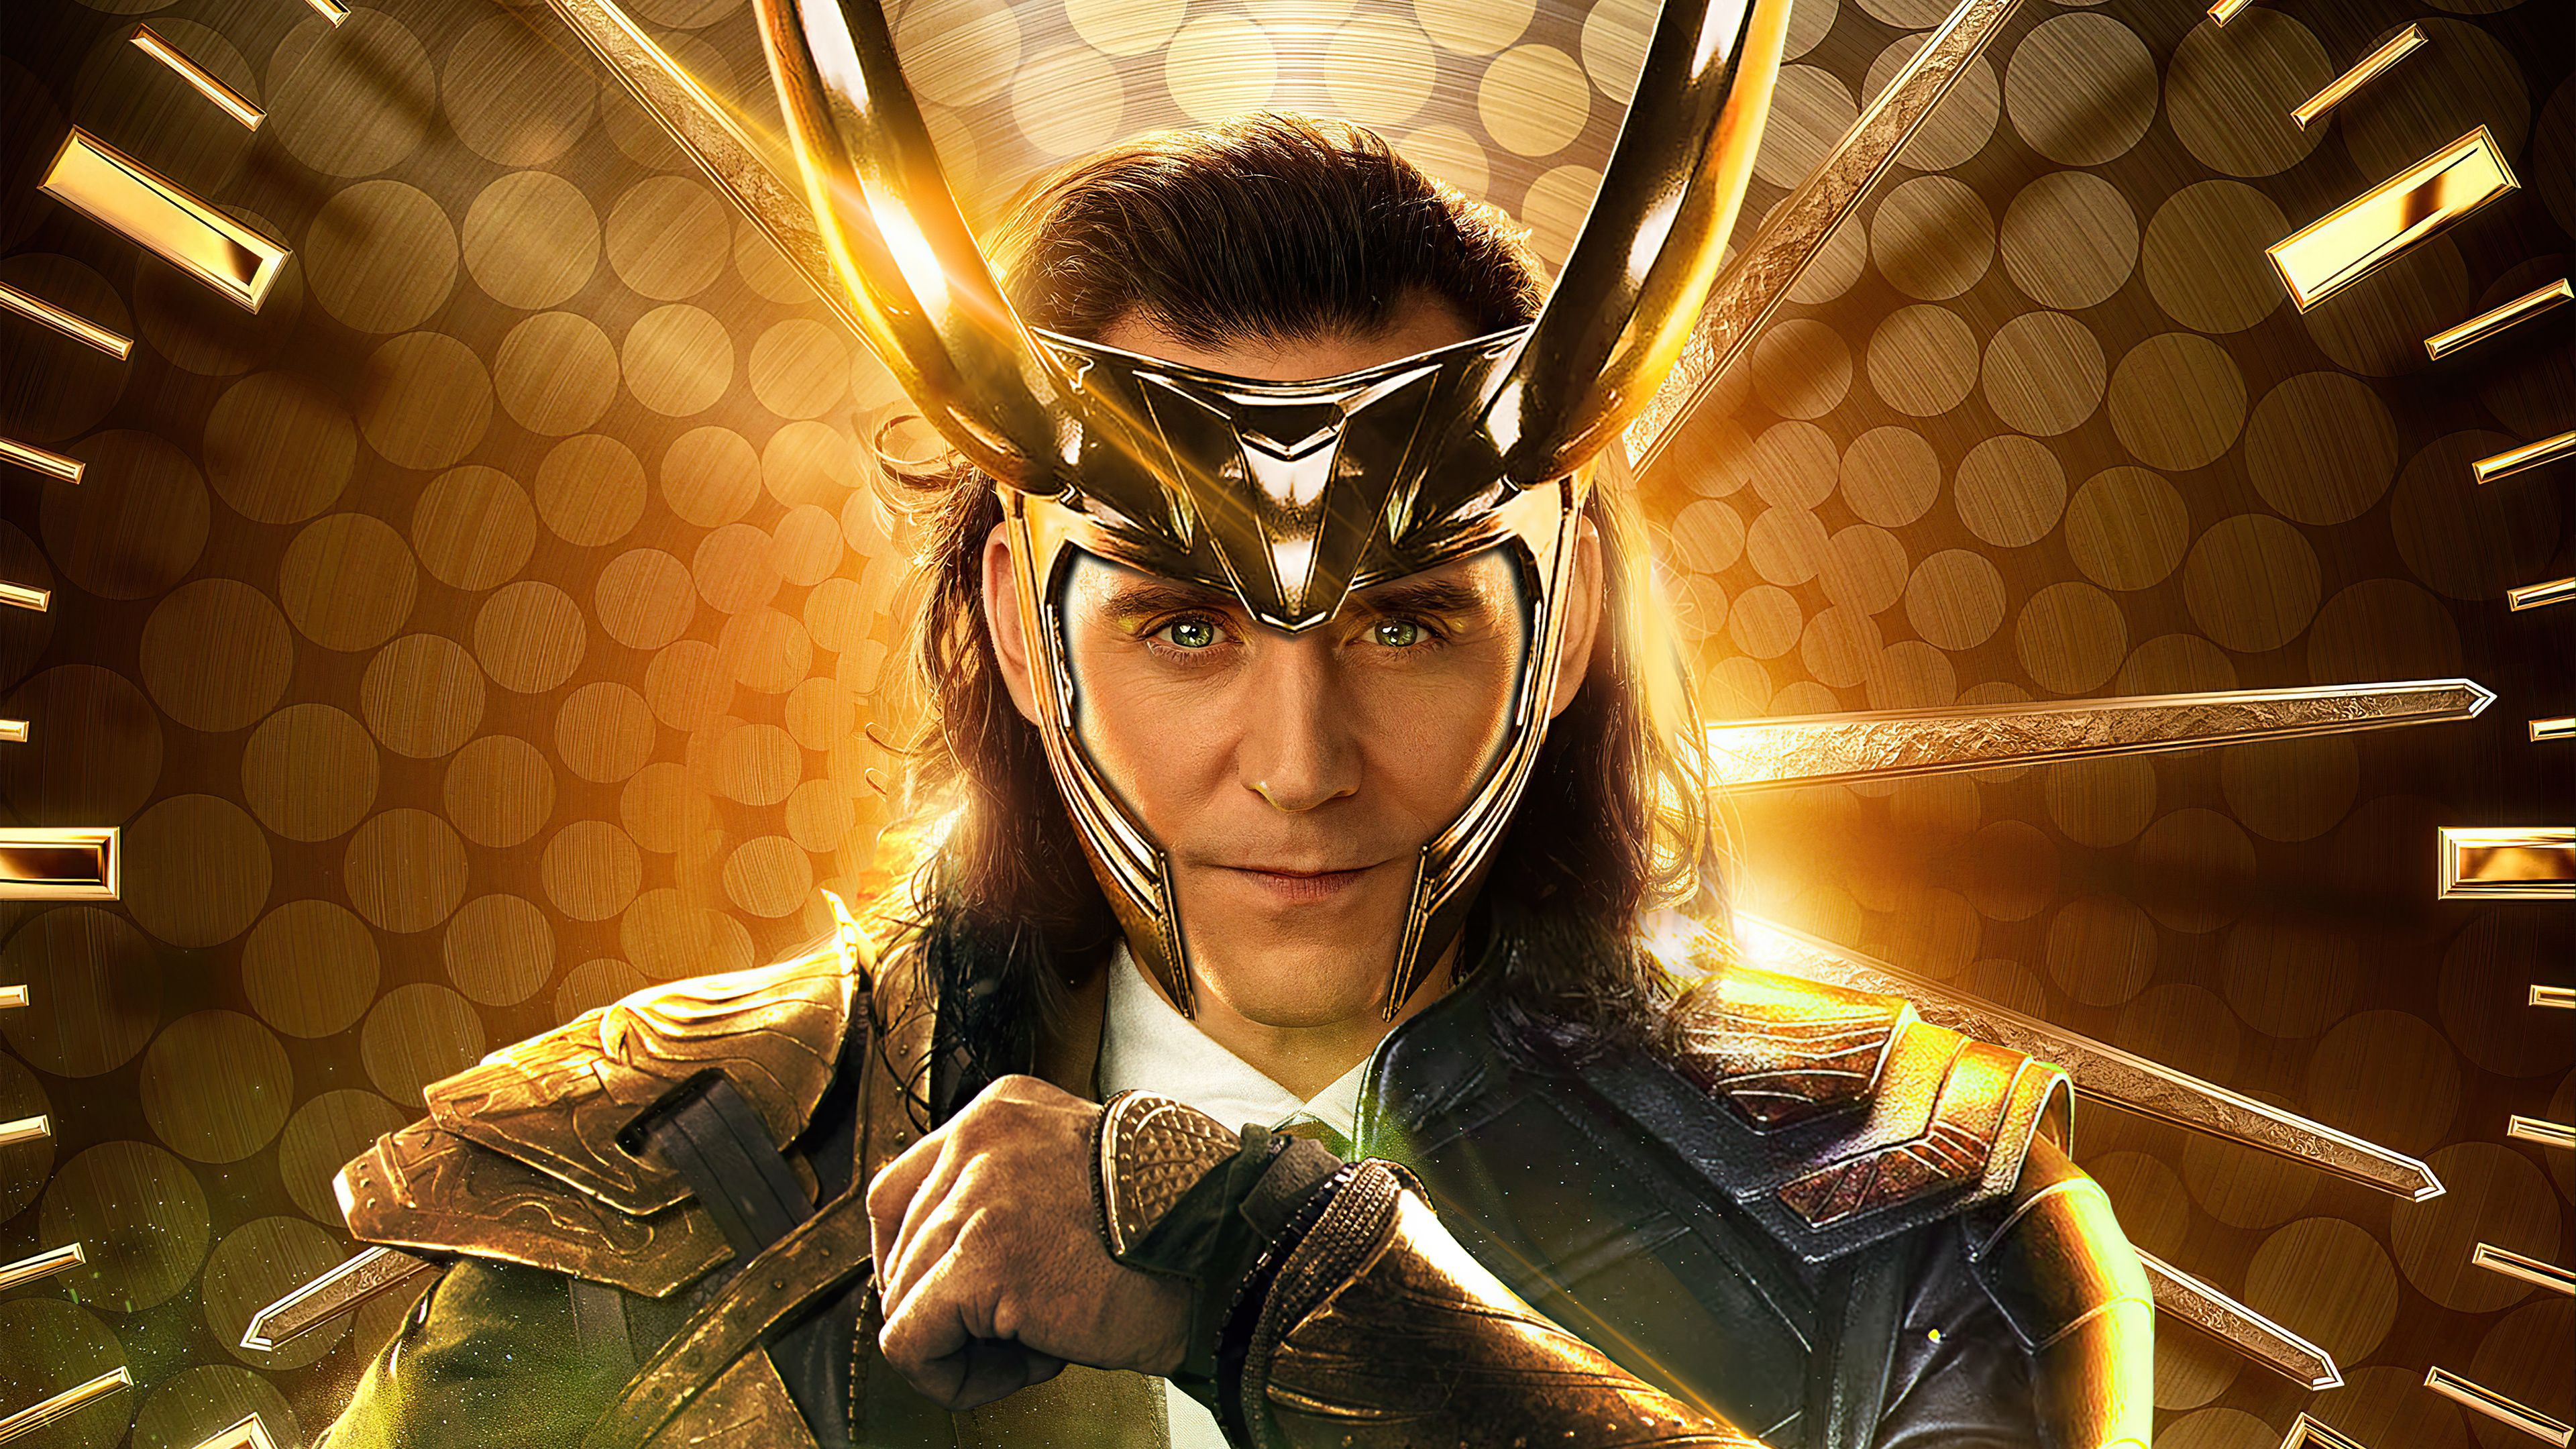 Loki God Of Mischief 4k, HD Tv Shows, 4k Wallpapers, Image, Backgrounds, Ph...